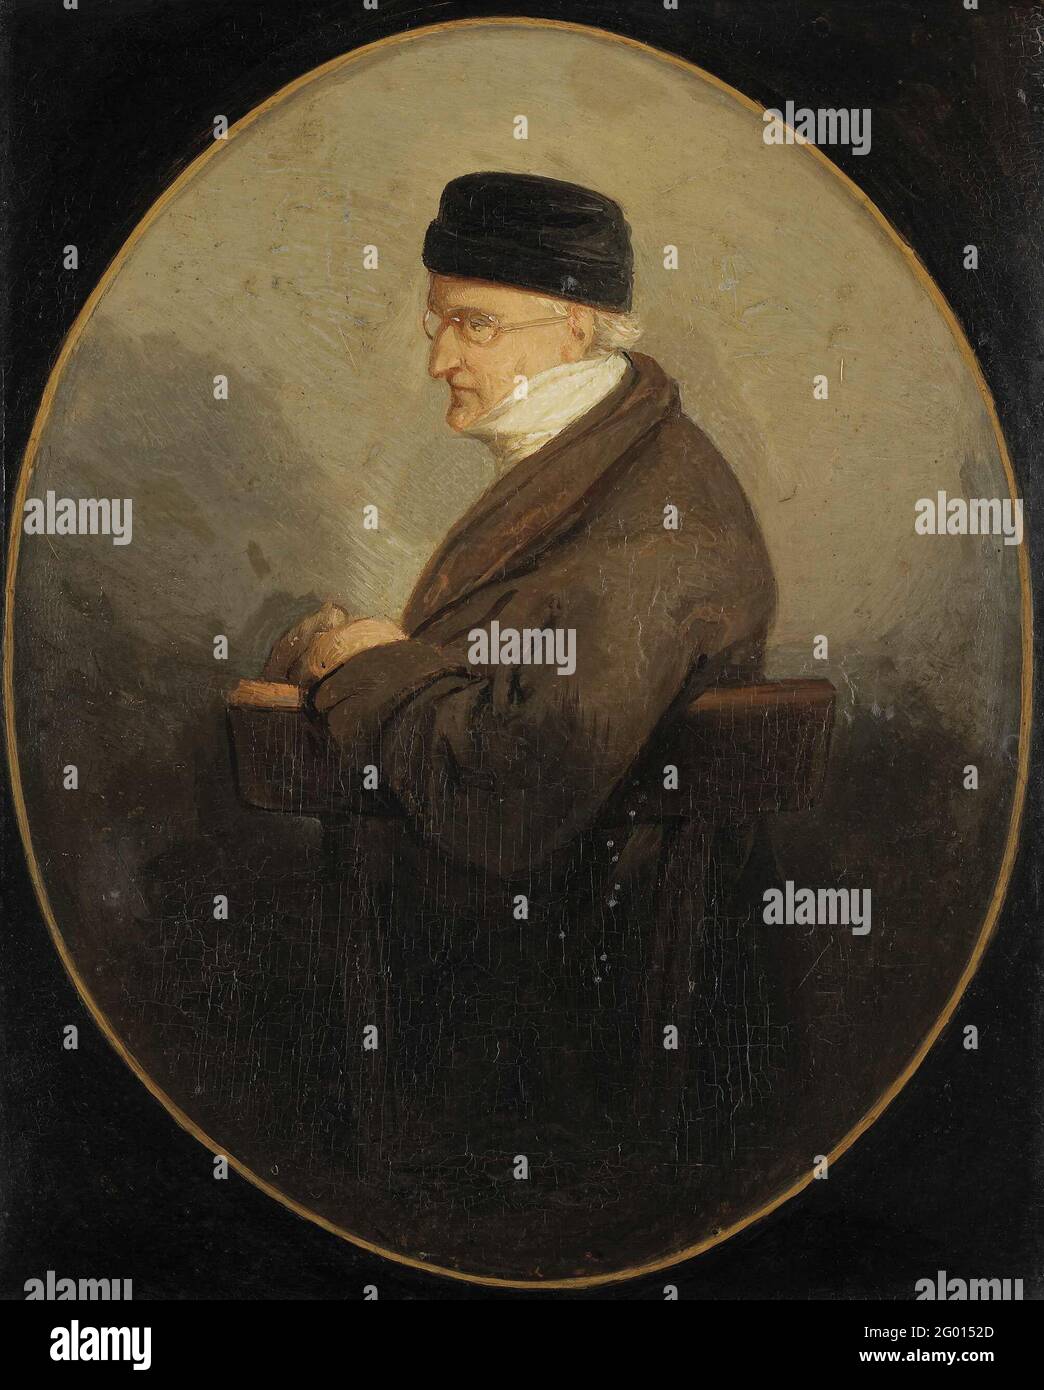 David Pierre Giottino Humbert De Superville (1770-1849), Painter and Writer. Portrait of David Pierre Giottino Humbert de Superville, painter and writer. Sitting in a chair, a black hat on the head. Stock Photo